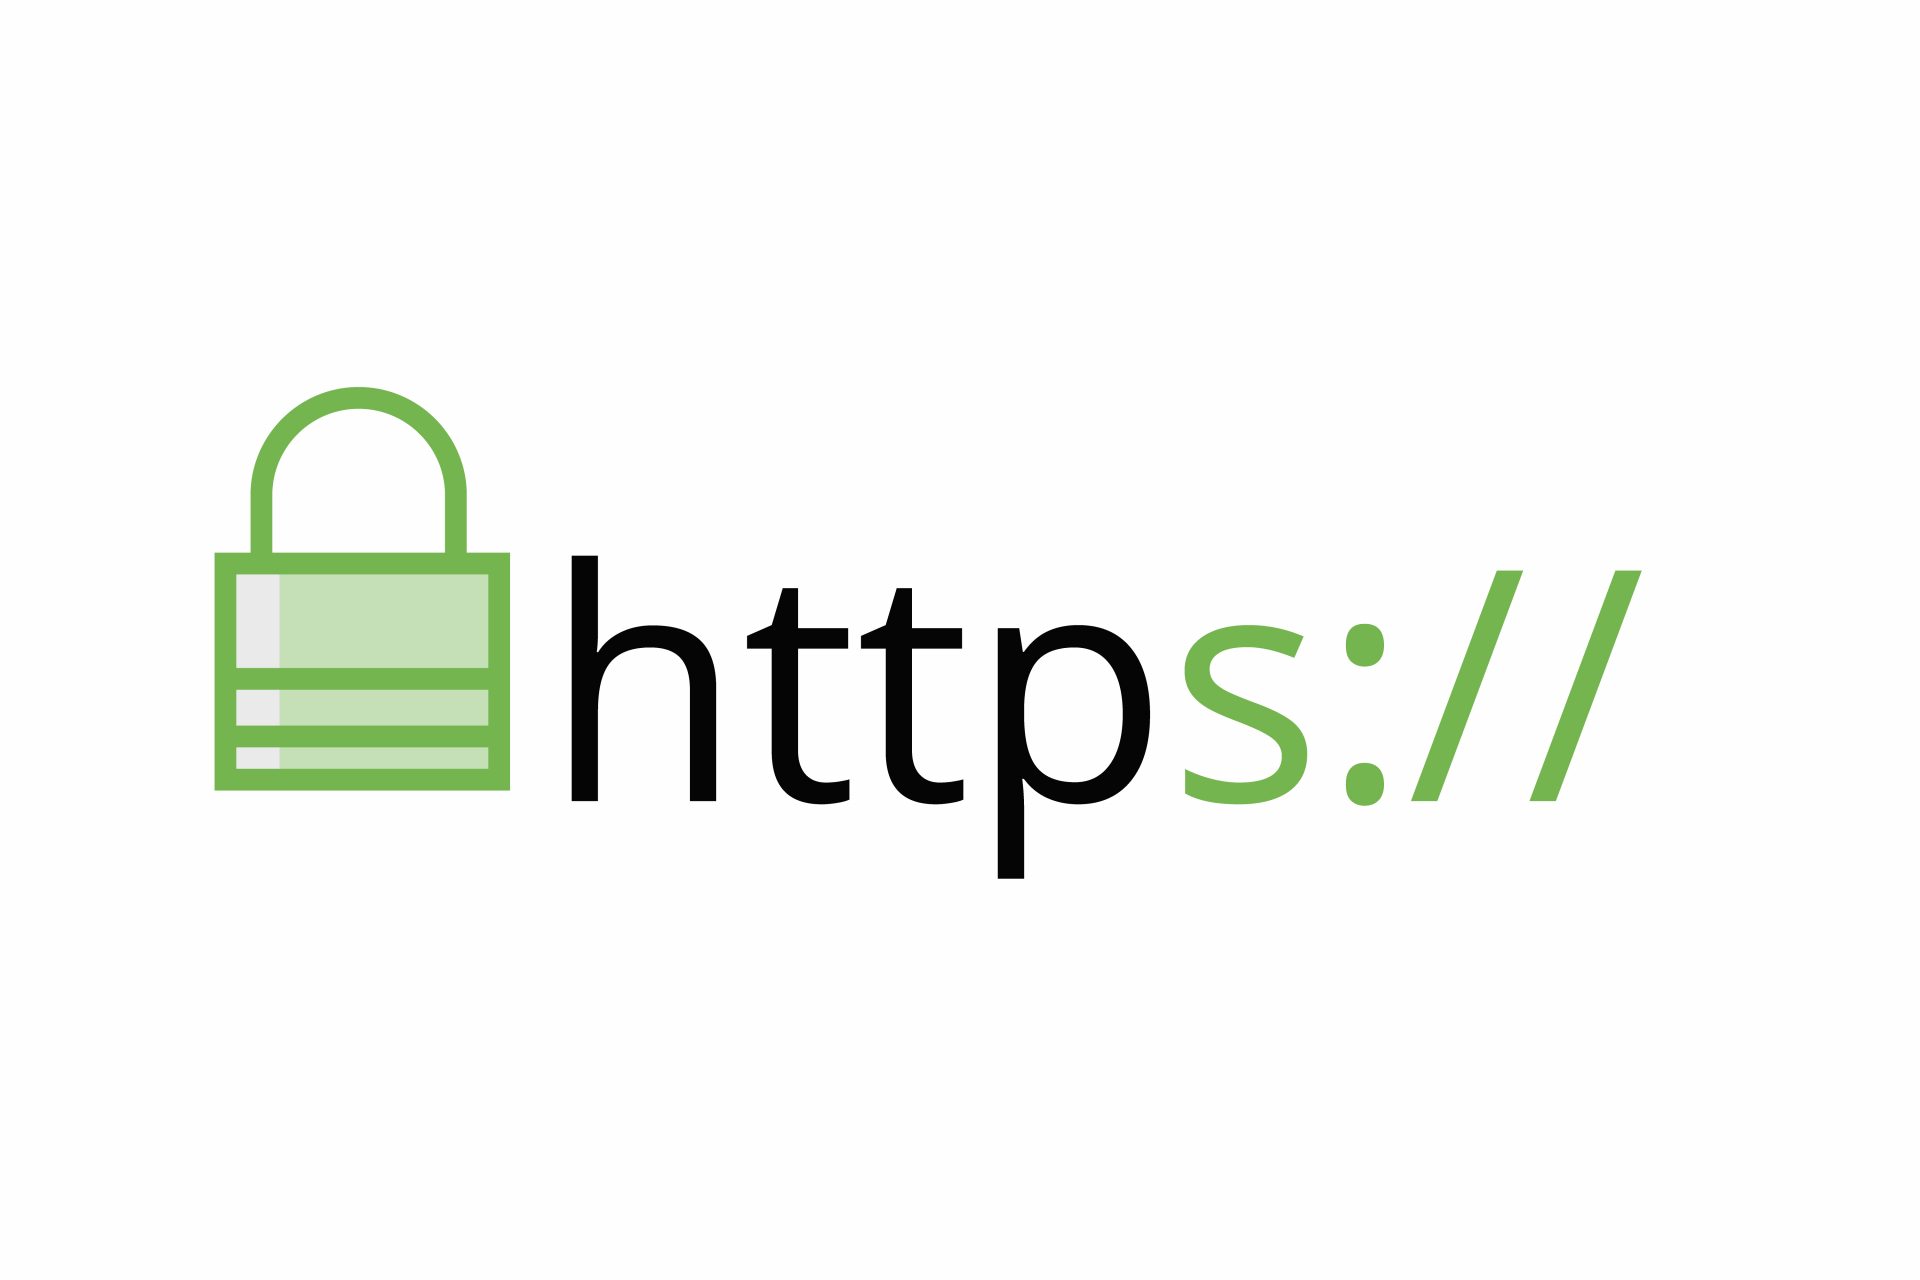 Https secure archiveofourown org. Картинка sitetampo. Waexsite картинка. SSL Certificate icon.